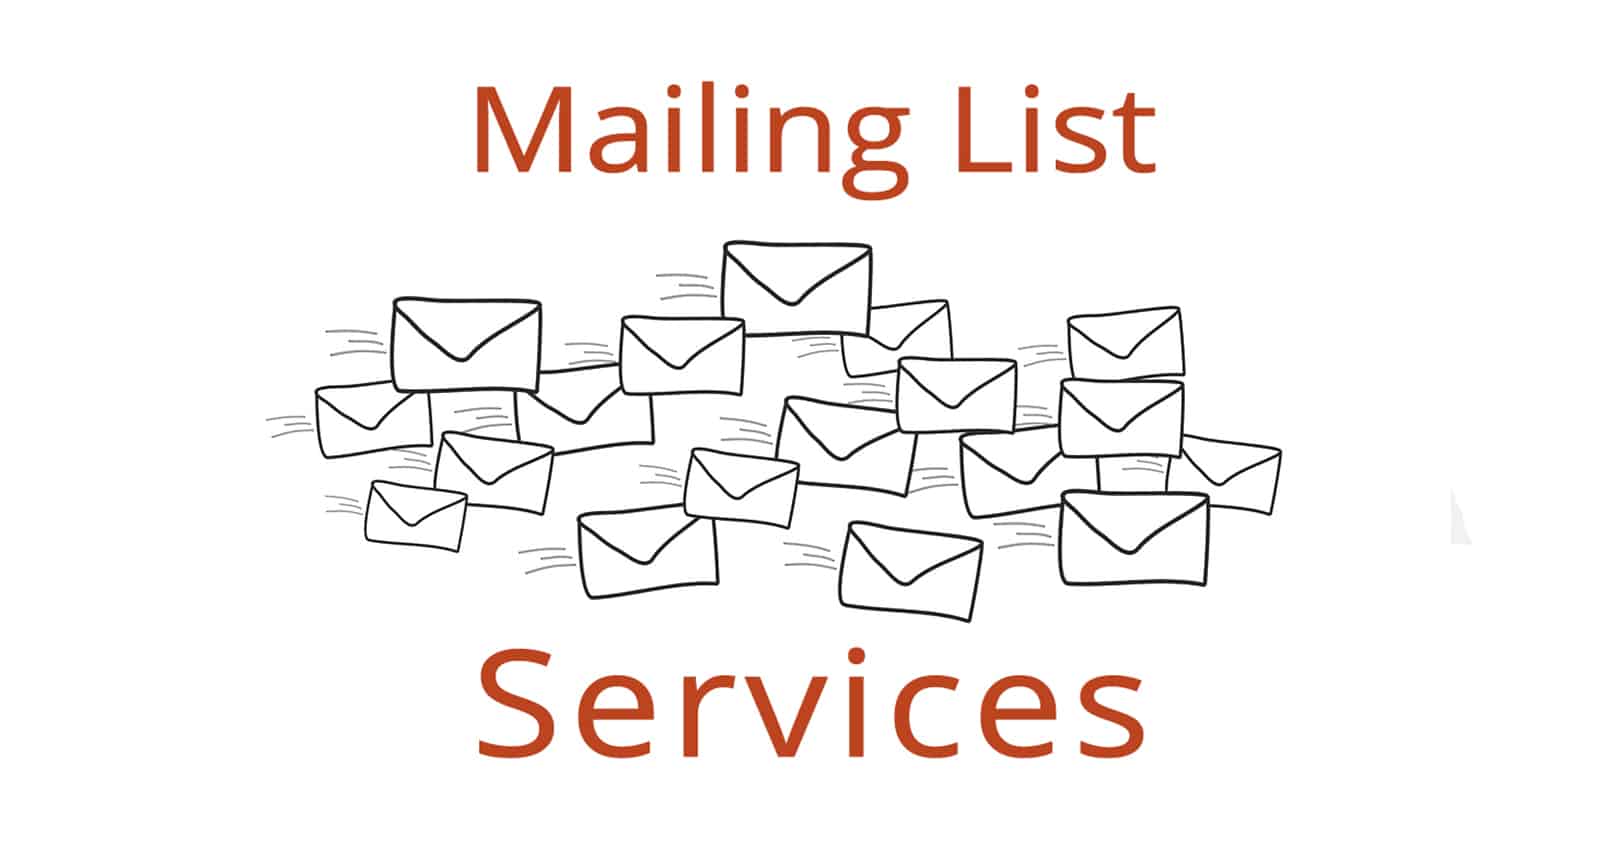 Mailing List Services